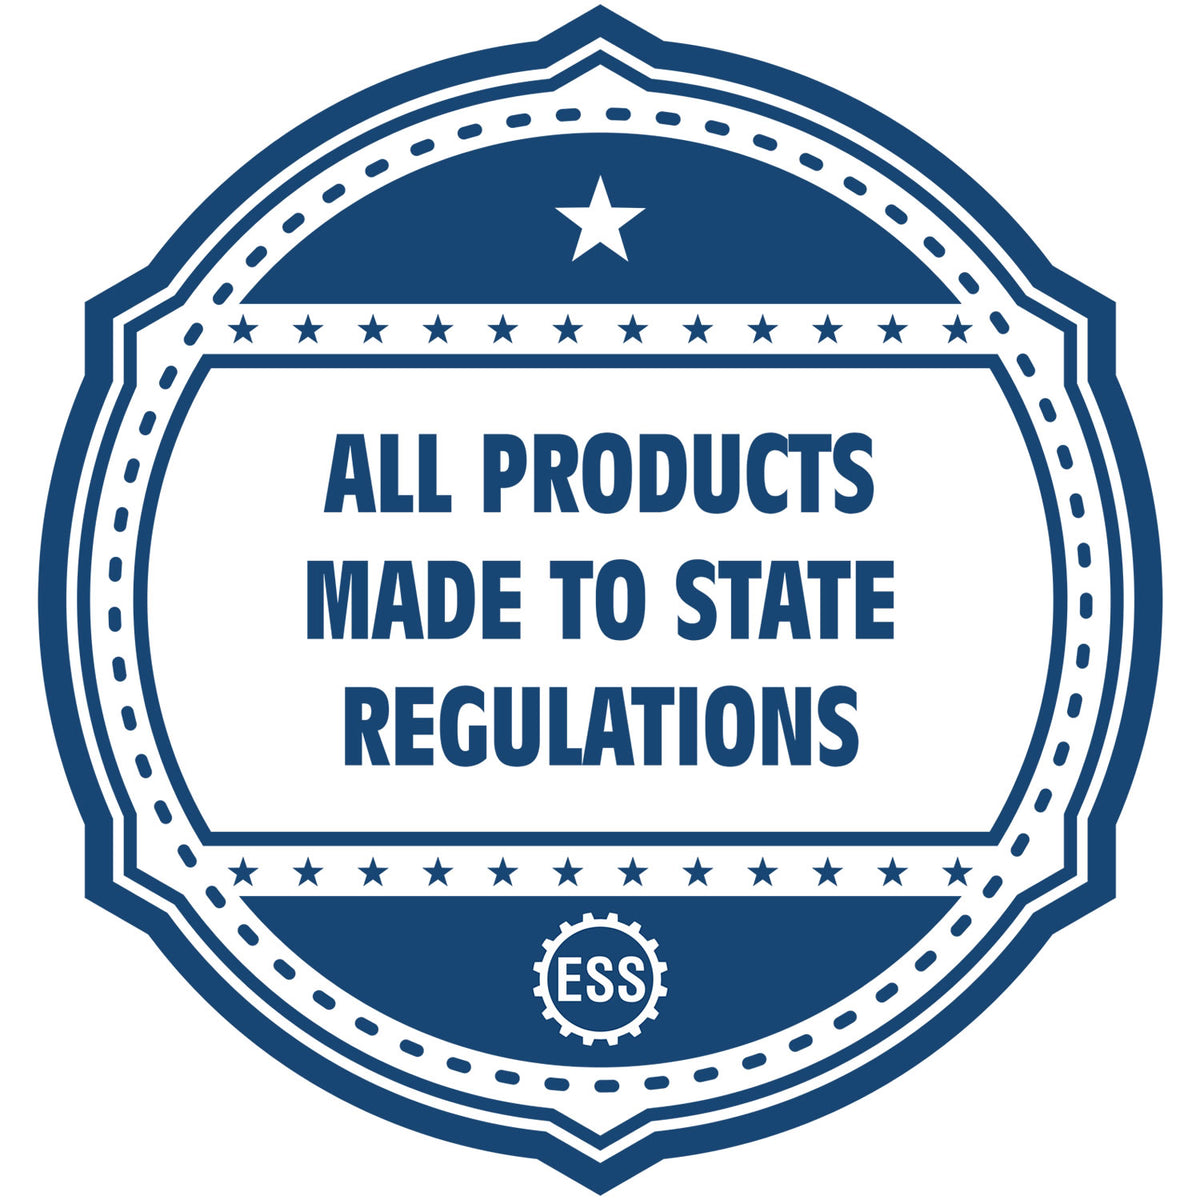 An icon or badge element for the Super Slim Utah Notary Public Stamp showing that this product is made in compliance with state regulations.